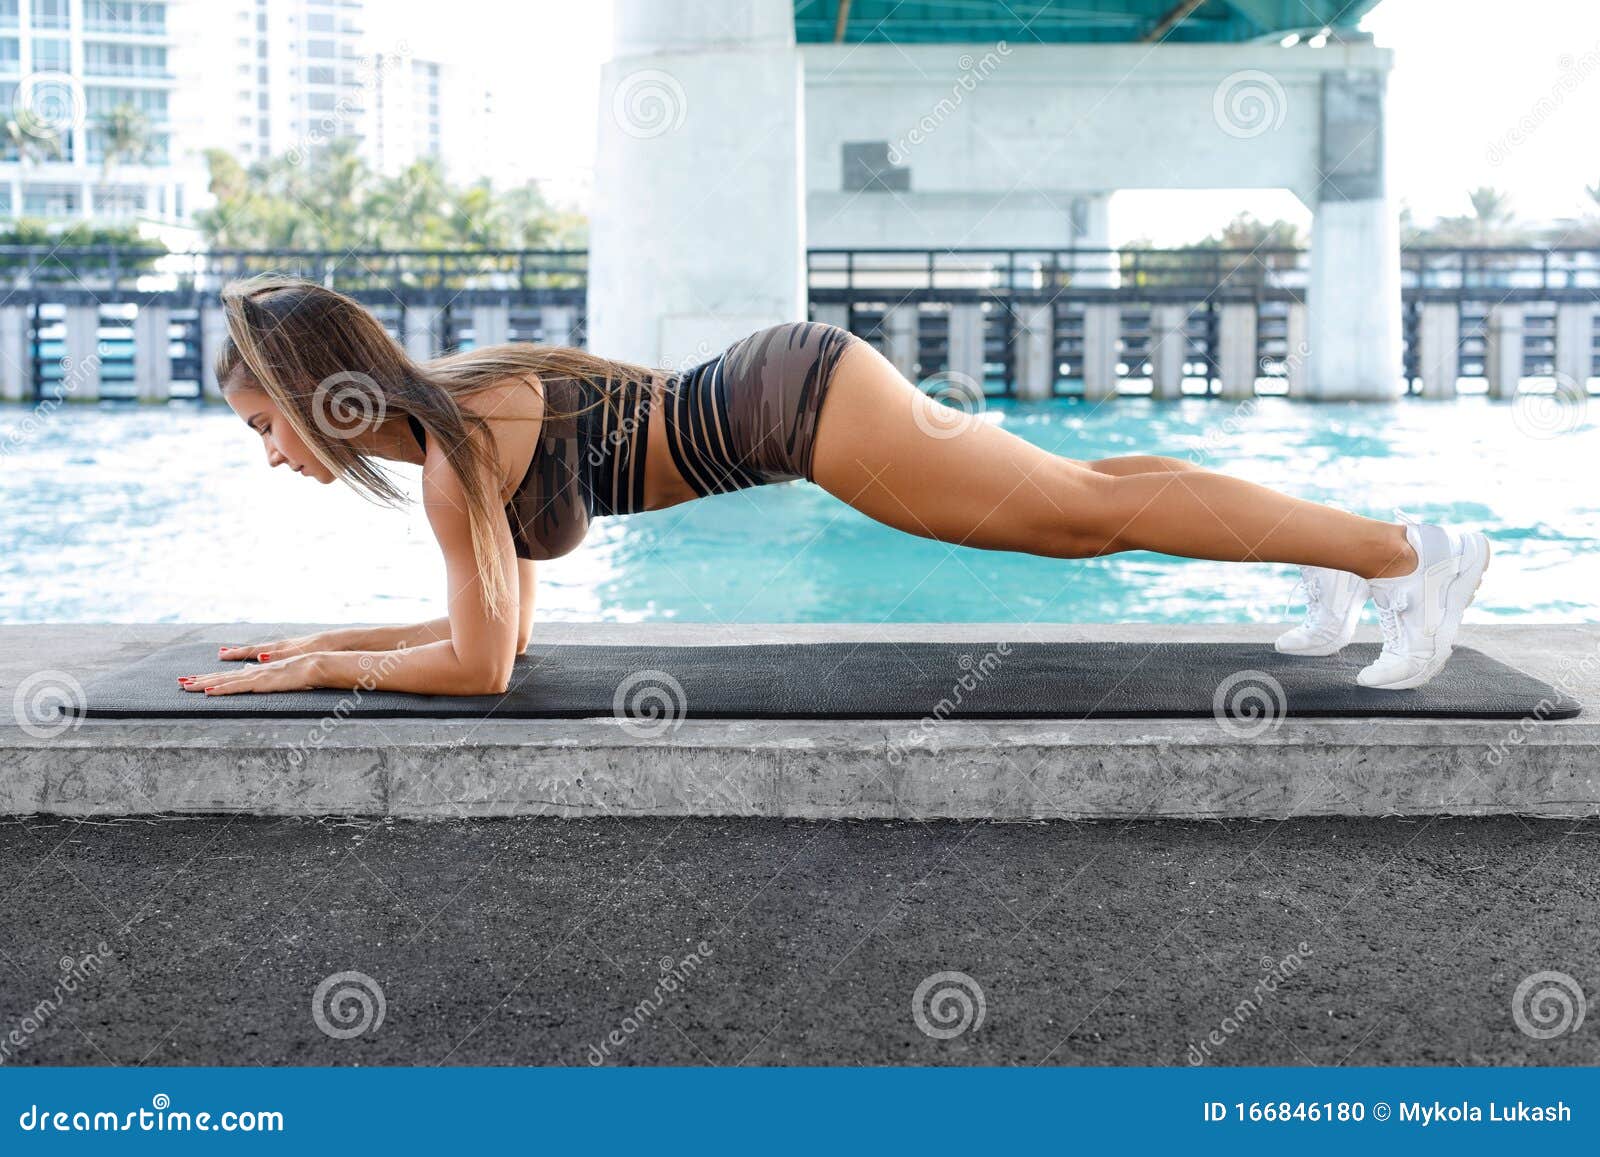 fitness woman doing planking exercise, workout. slim athletic girl training, outdoors